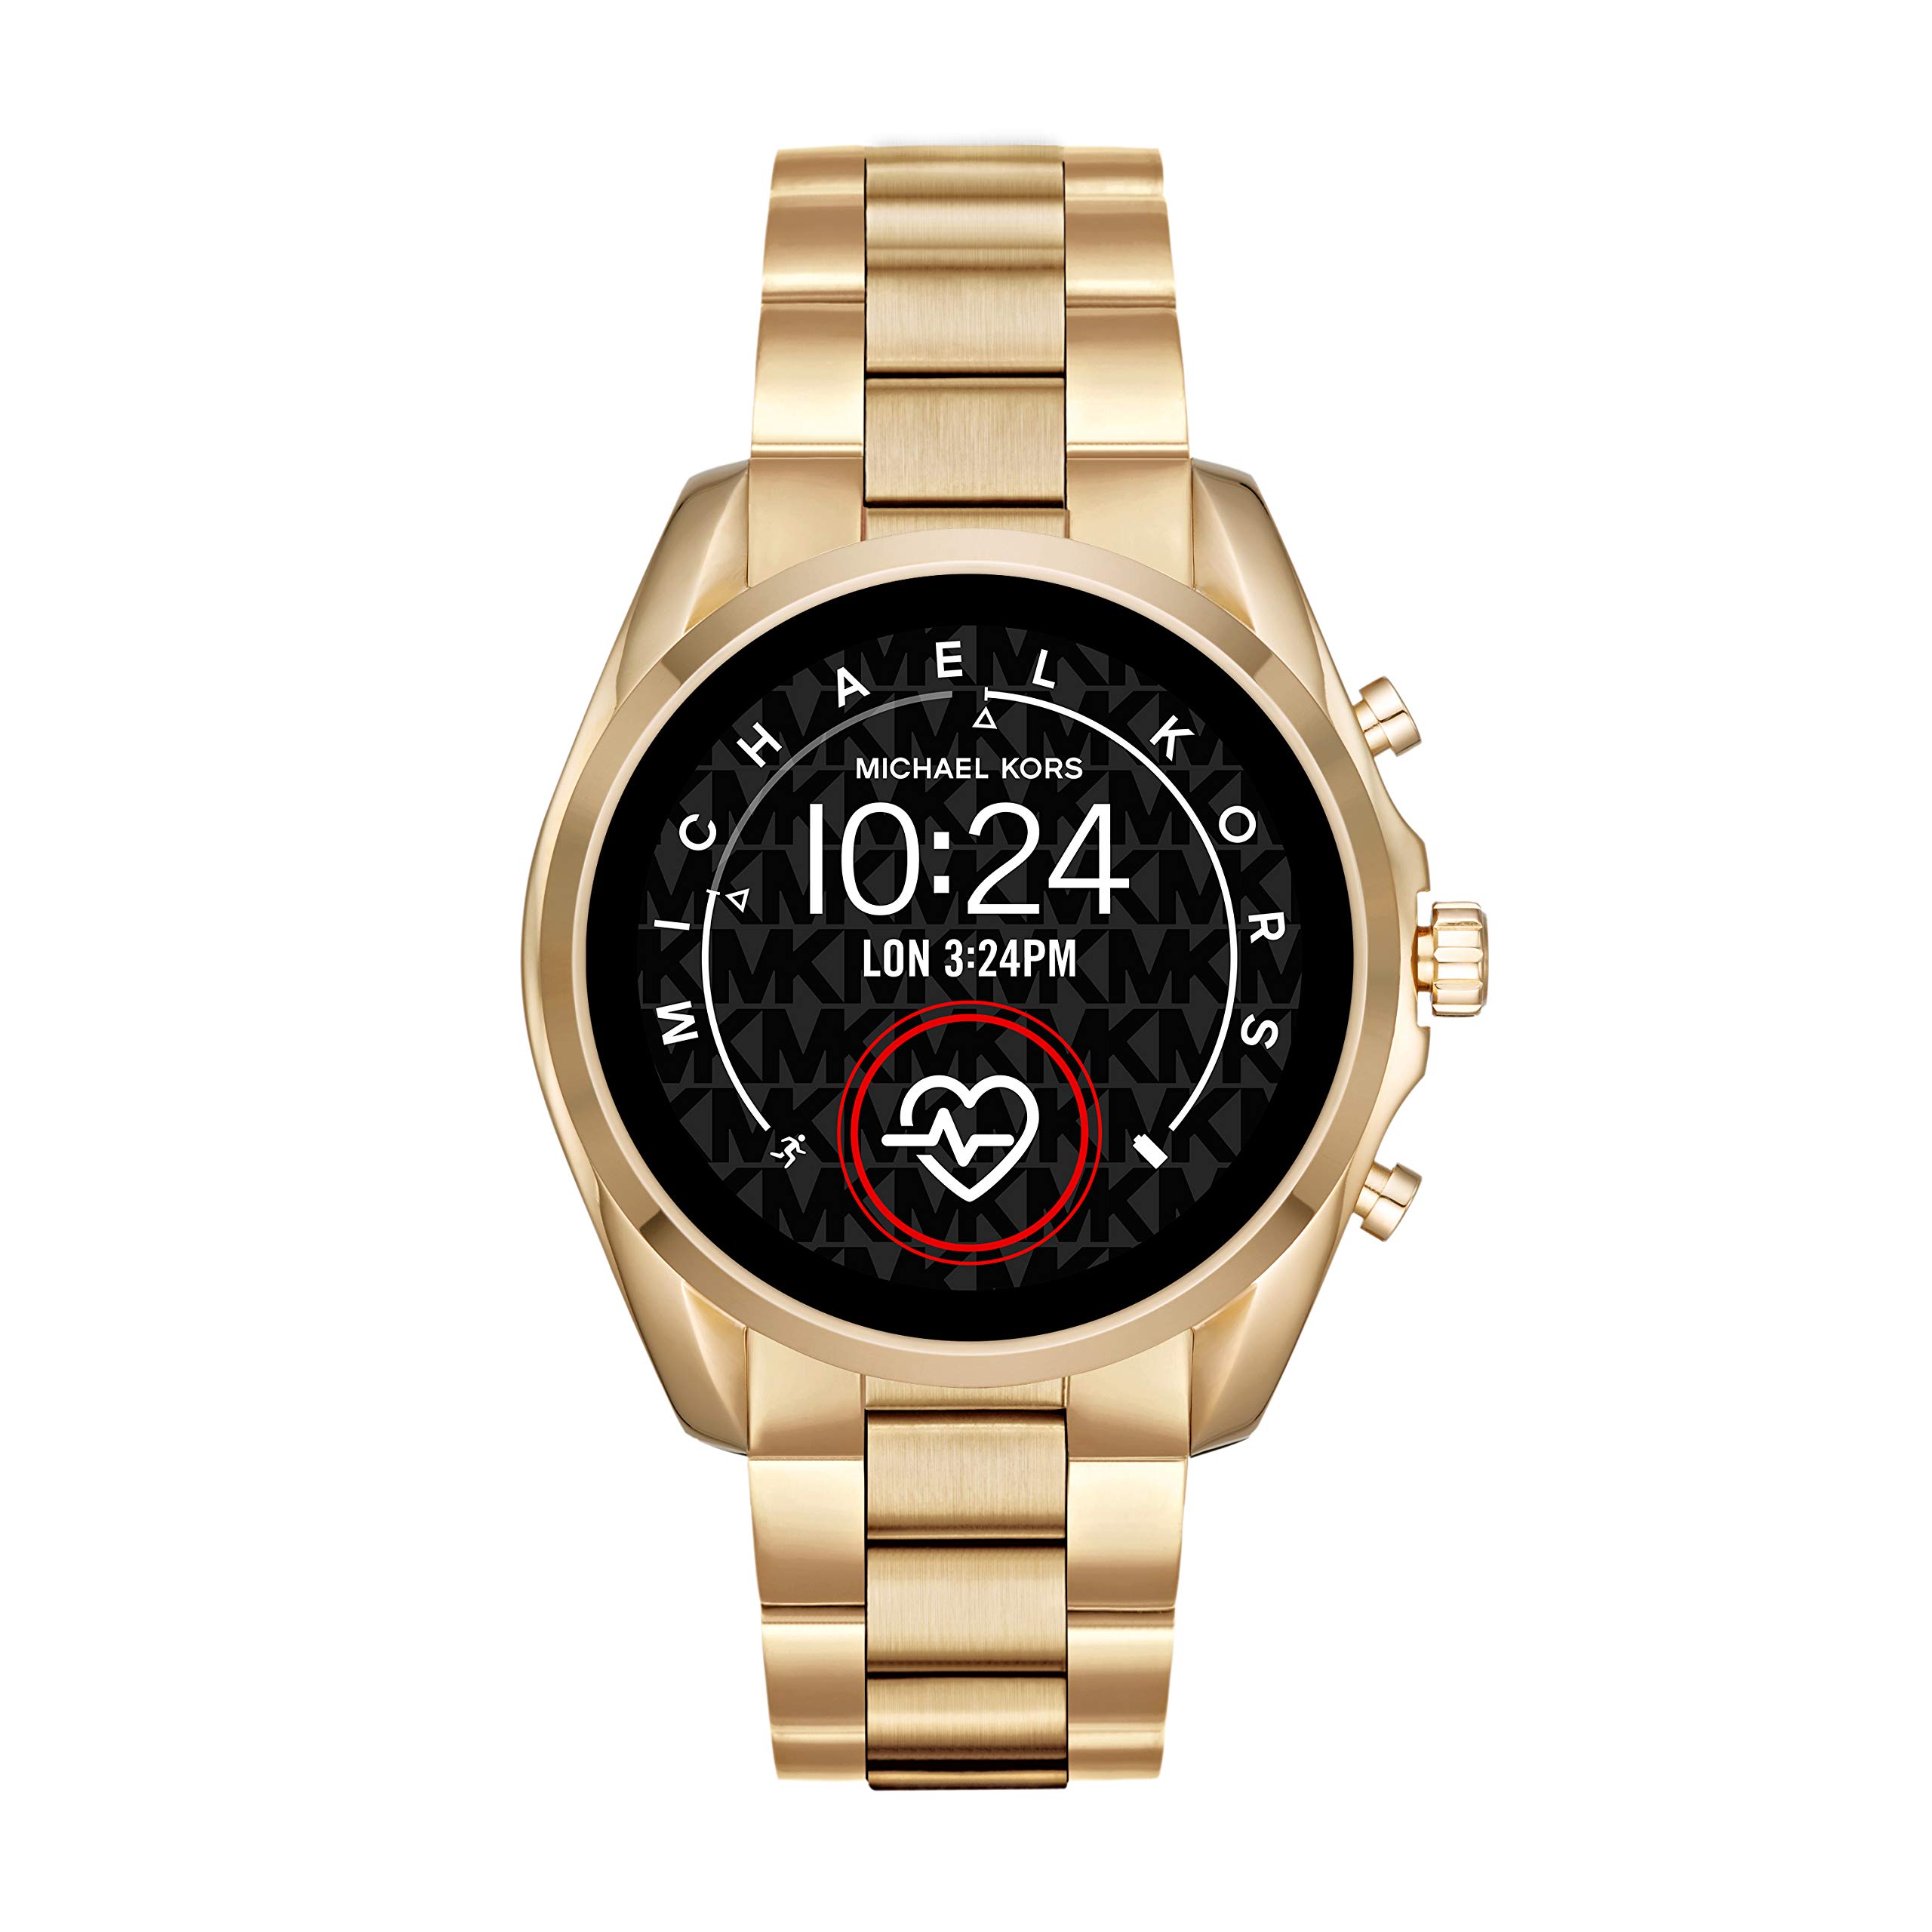 Michael Kors Access Gen 5 Bradshaw Smartwatch, Powered with Wear OS by Google with Speaker, Heart Rate, GPS, NFC, and Smartphone Notifications